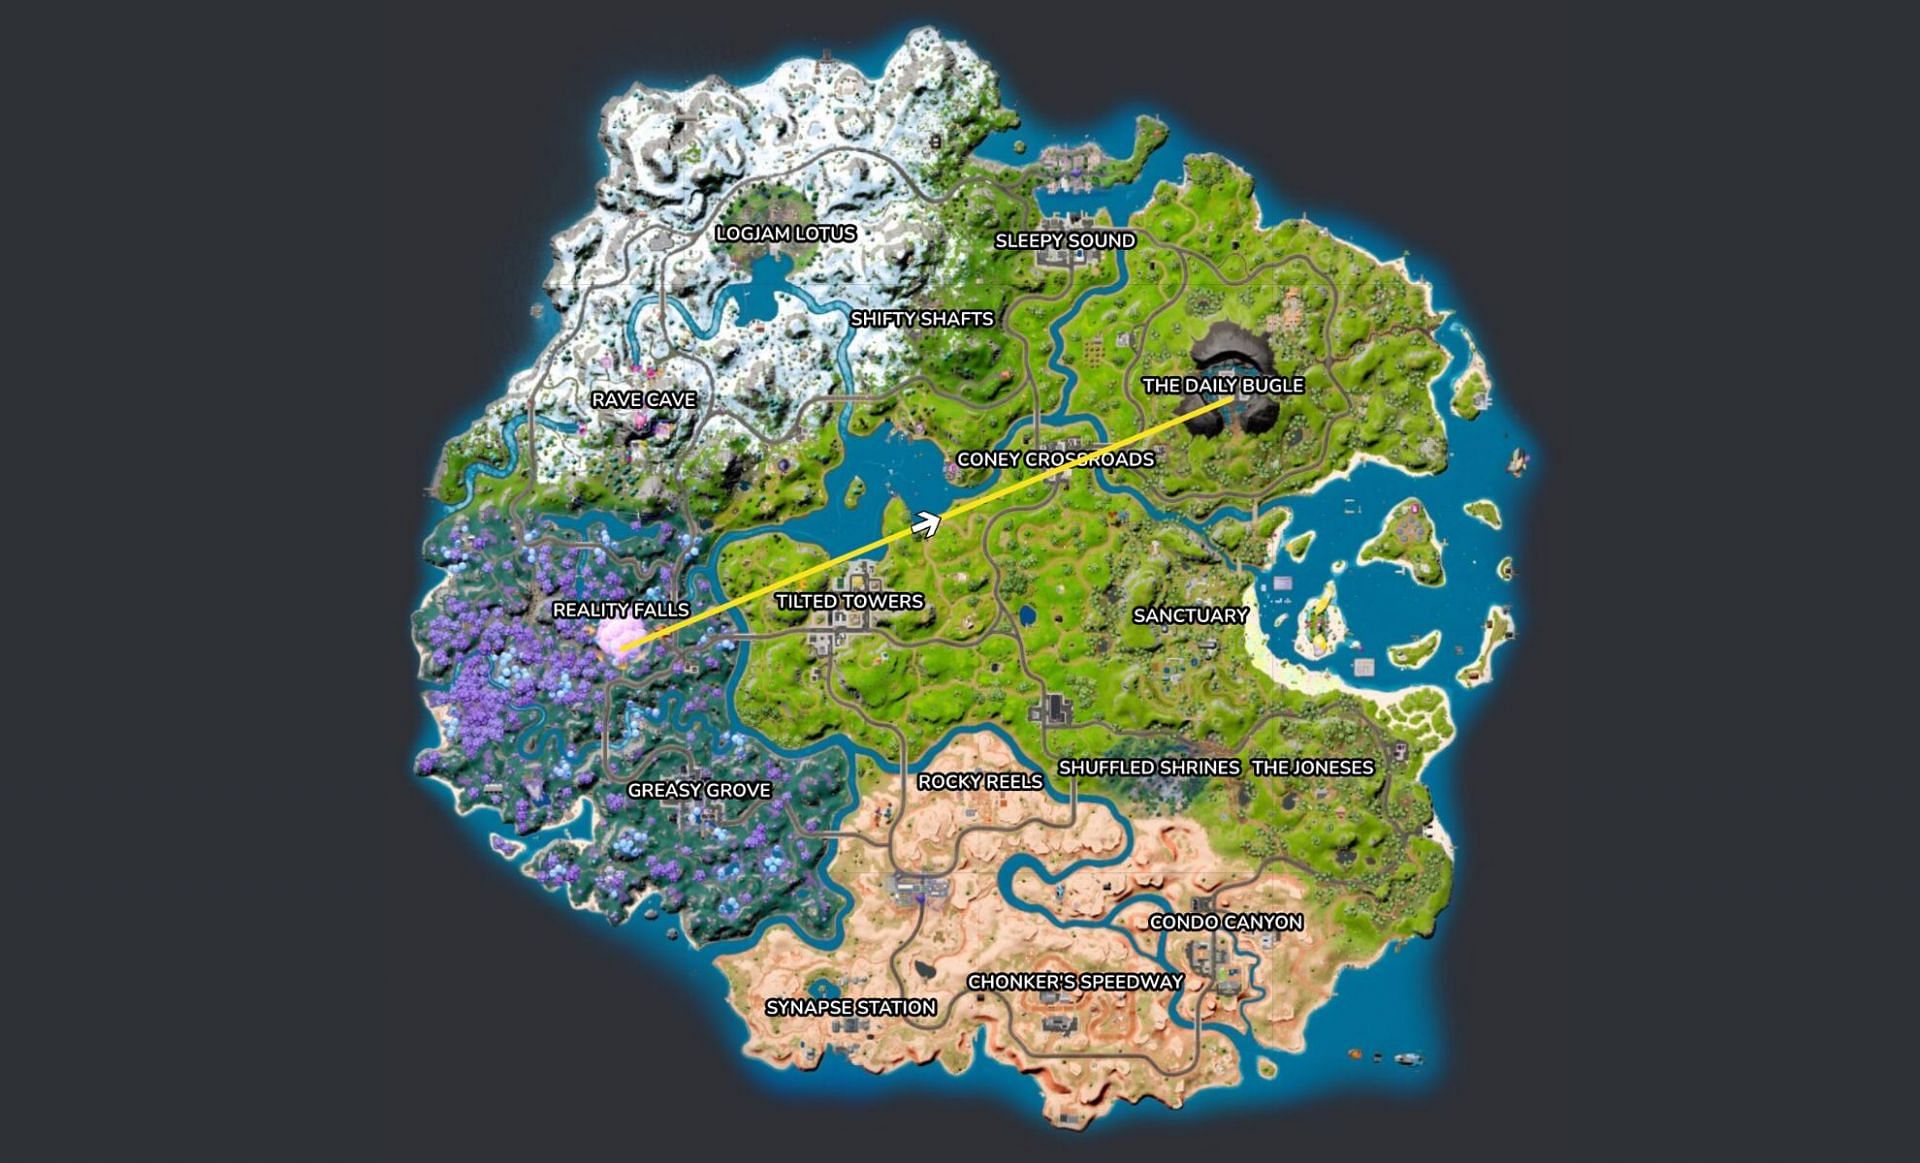 The Reality Tree&#039;s roots are heading east (Image via Fortnite.GG)